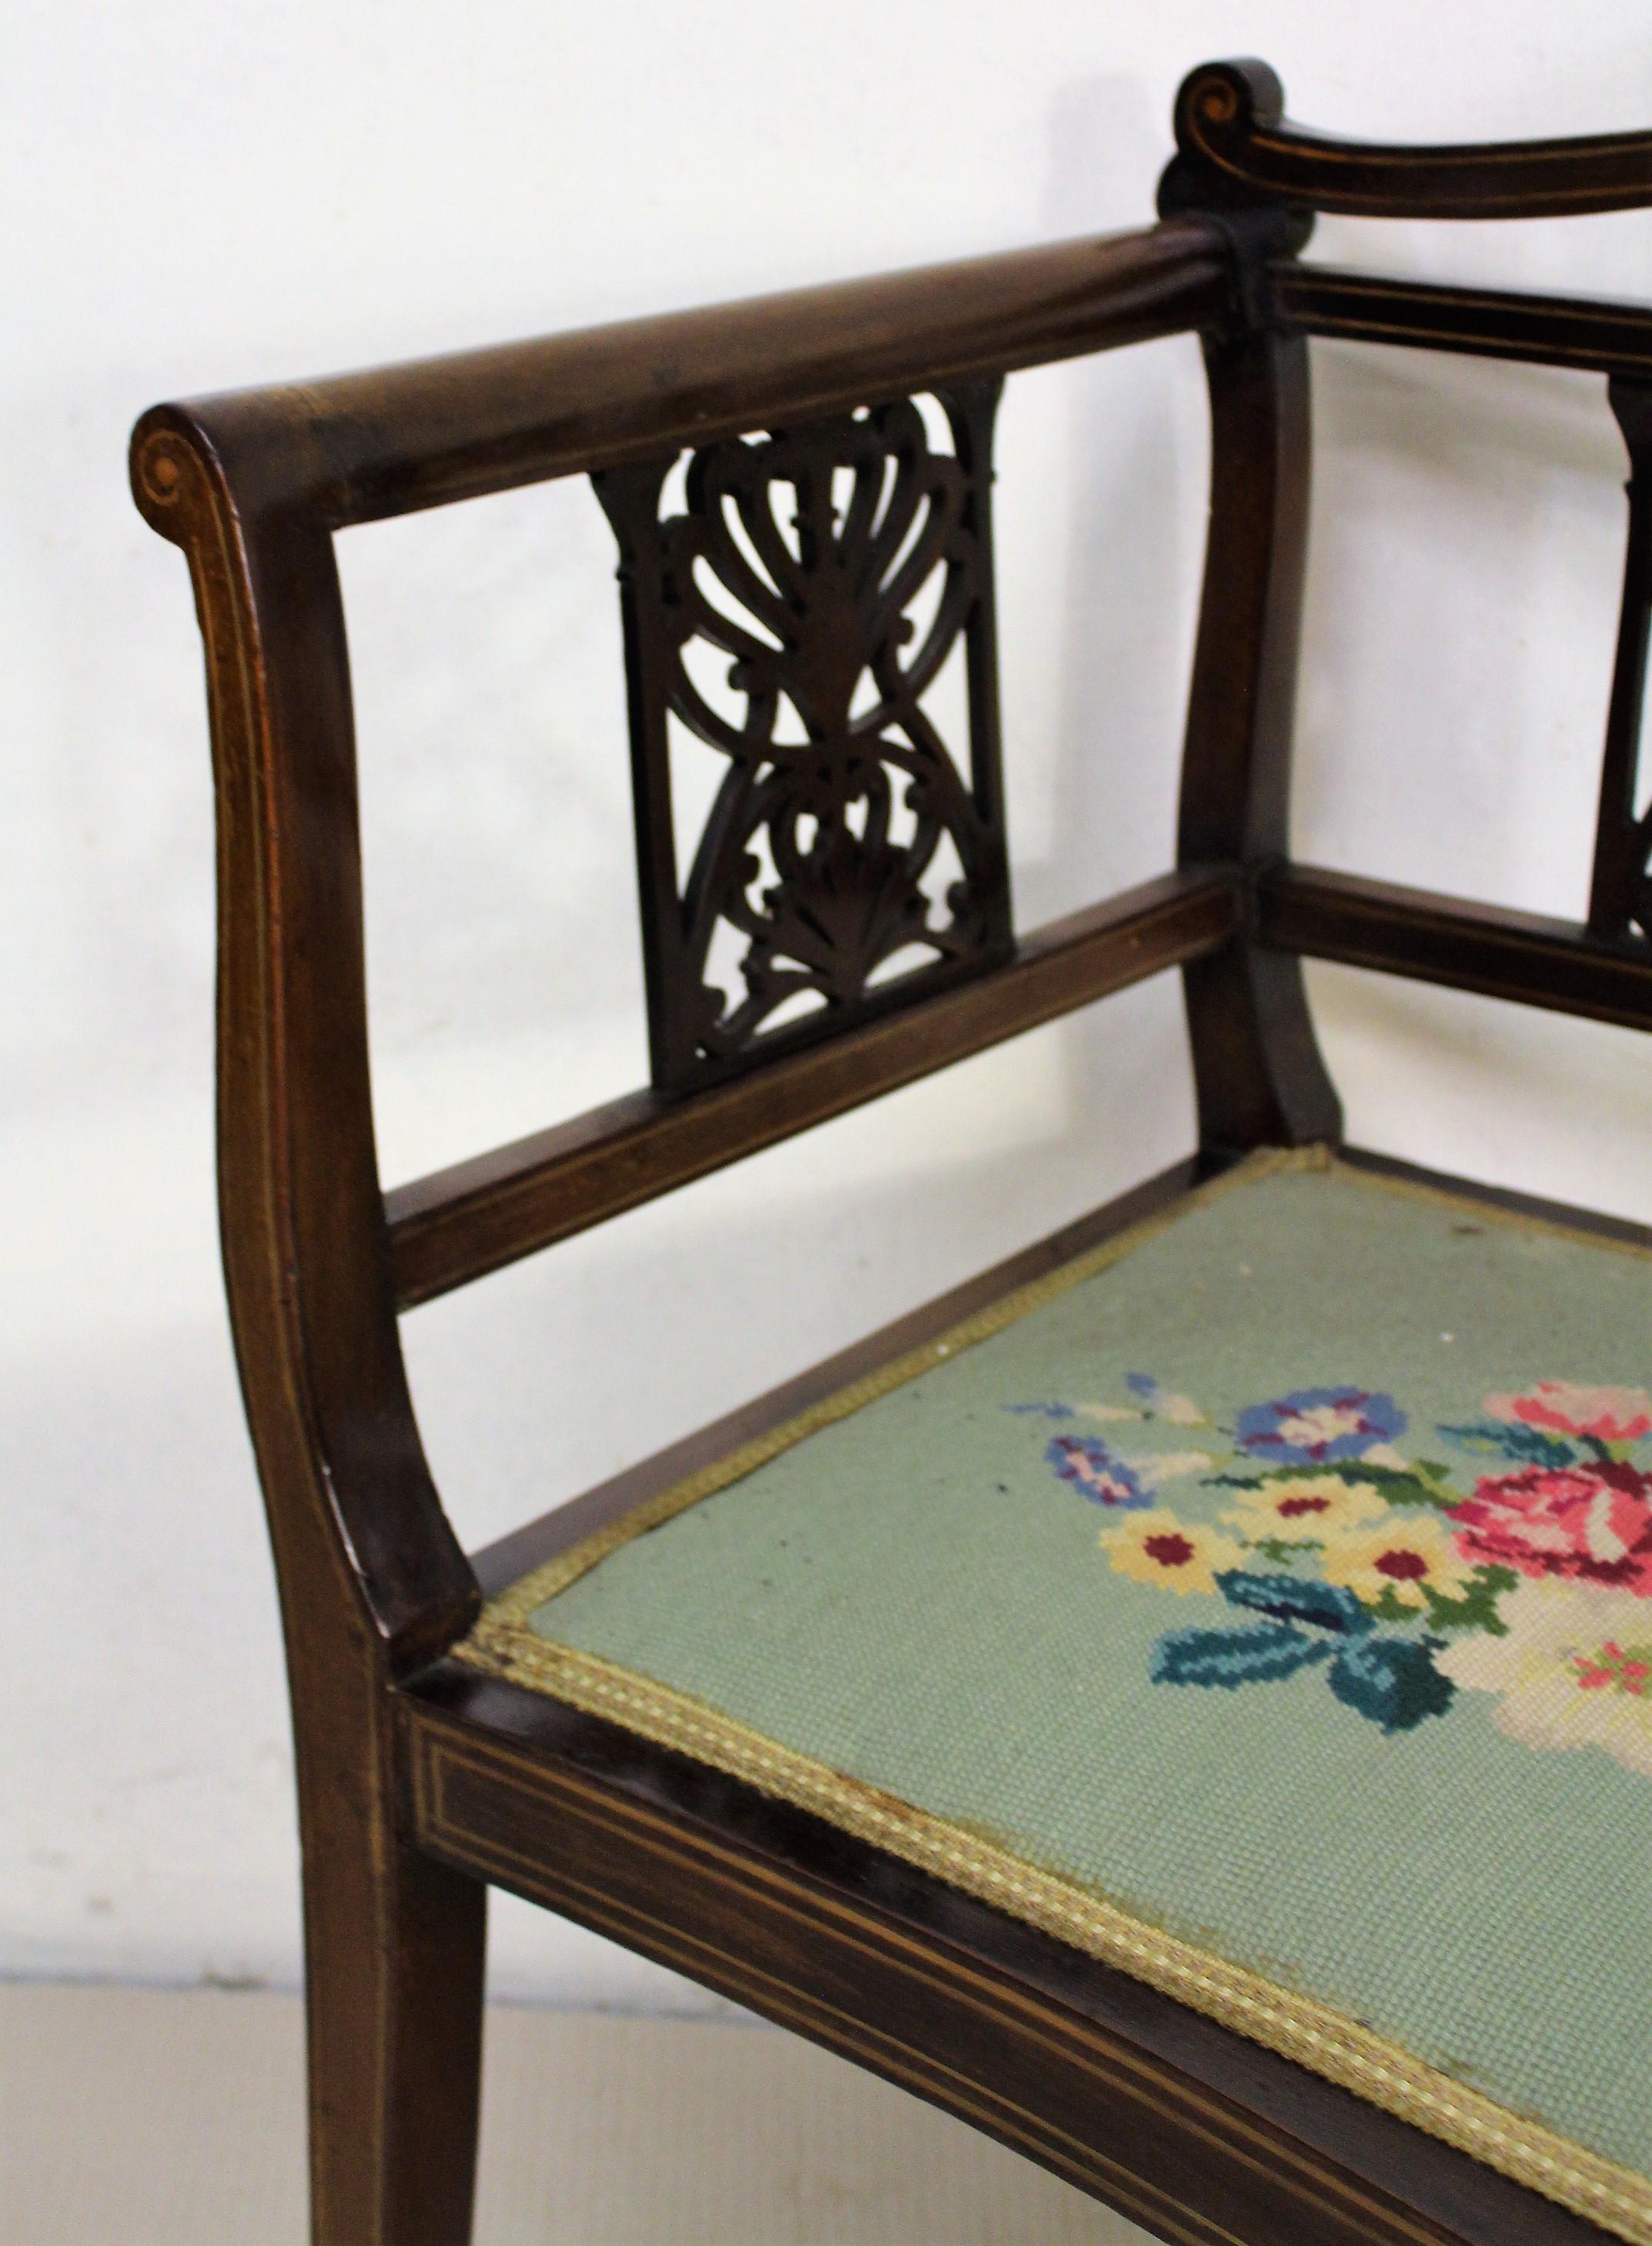 English Edwardian Period Inlaid Mahogany Settee or Bench For Sale 4